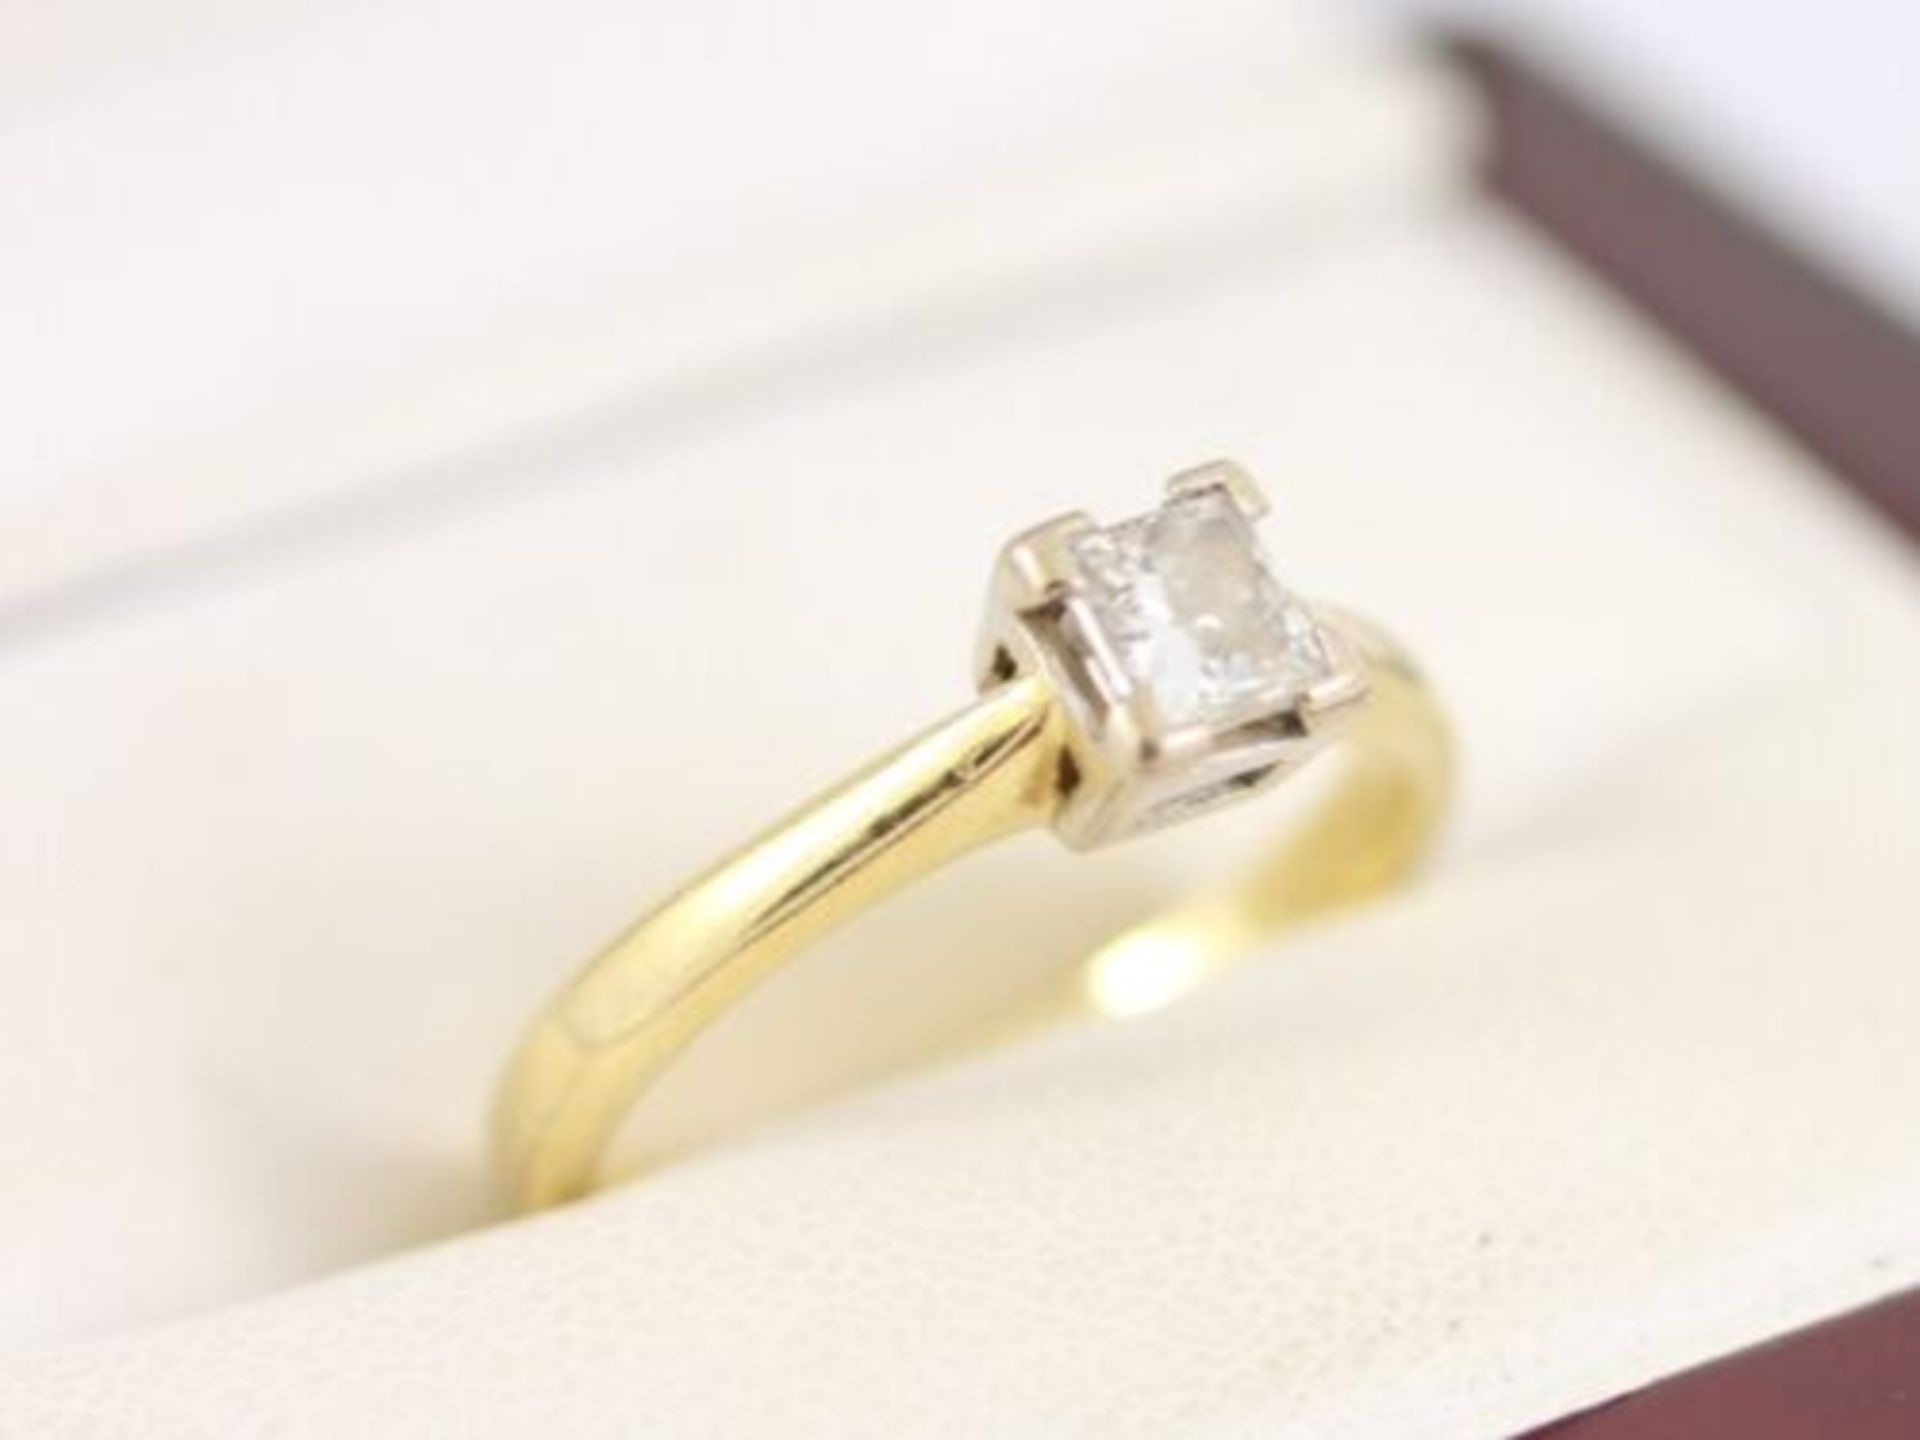 DIAMOND SOLITAIRE RING 18CT GOLD LADIES SIZE J 1/2 750 2.8G - Image 2 of 4